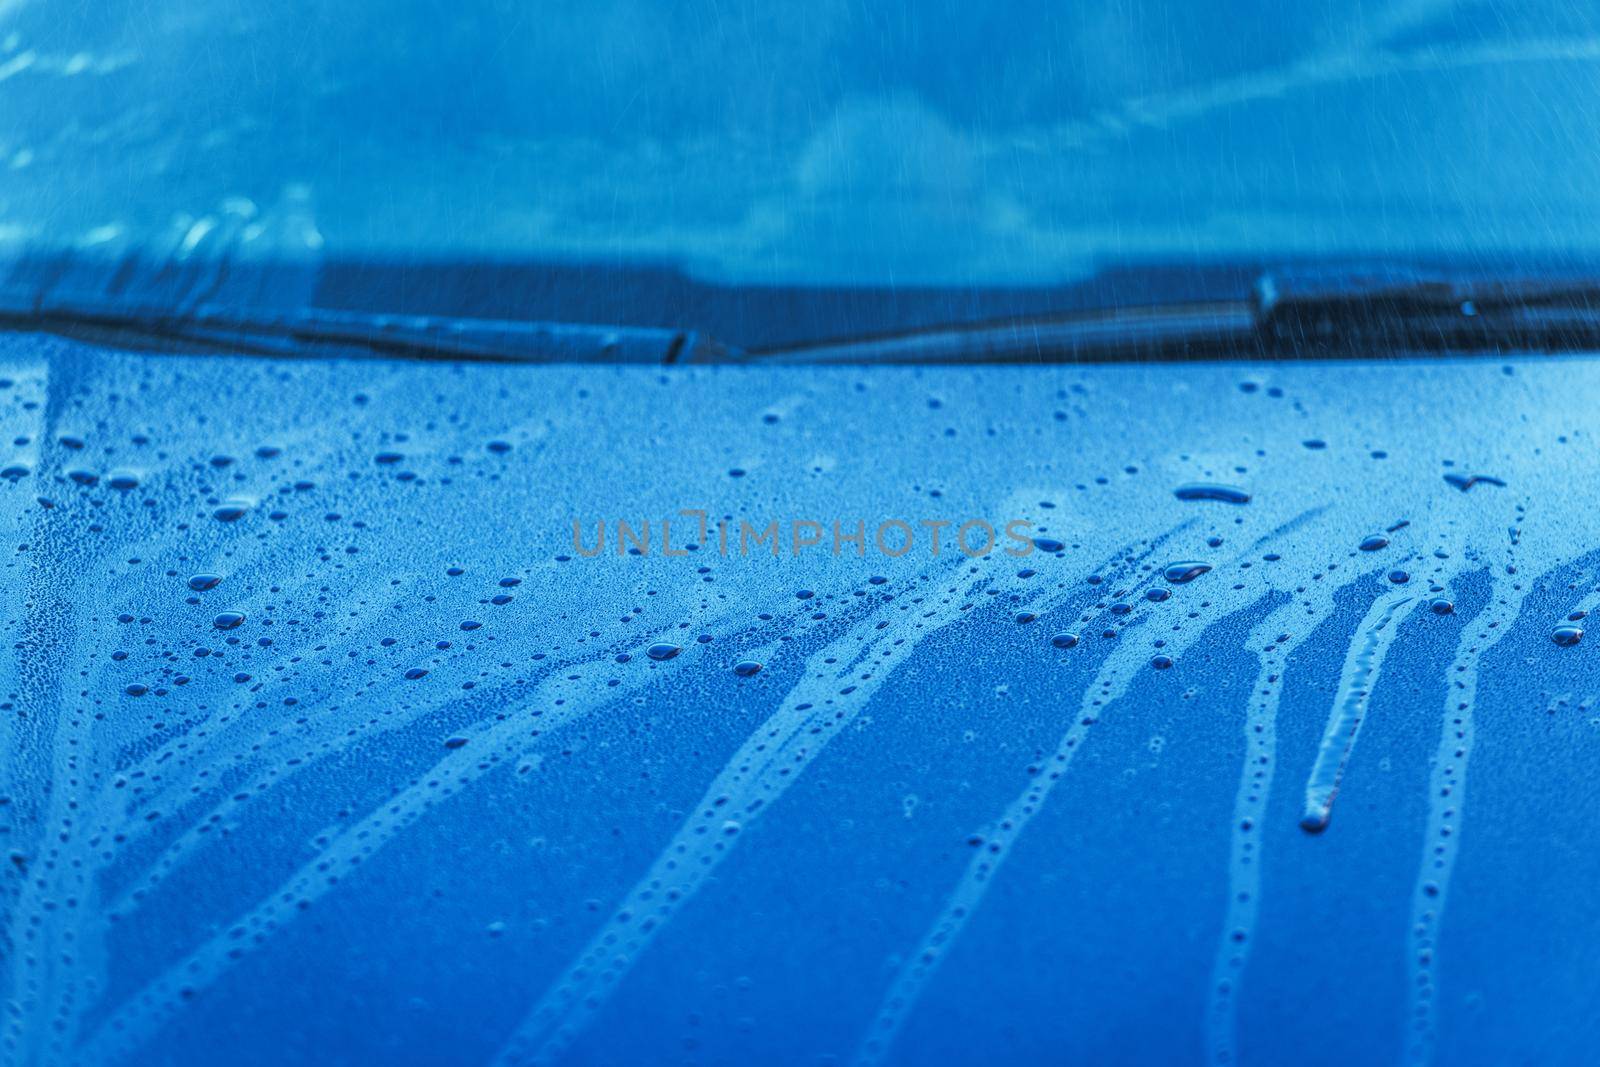 Close Image Of Wet Blue Passenger Car Hood And Windshield With Water Dripping Down.  by welcomia